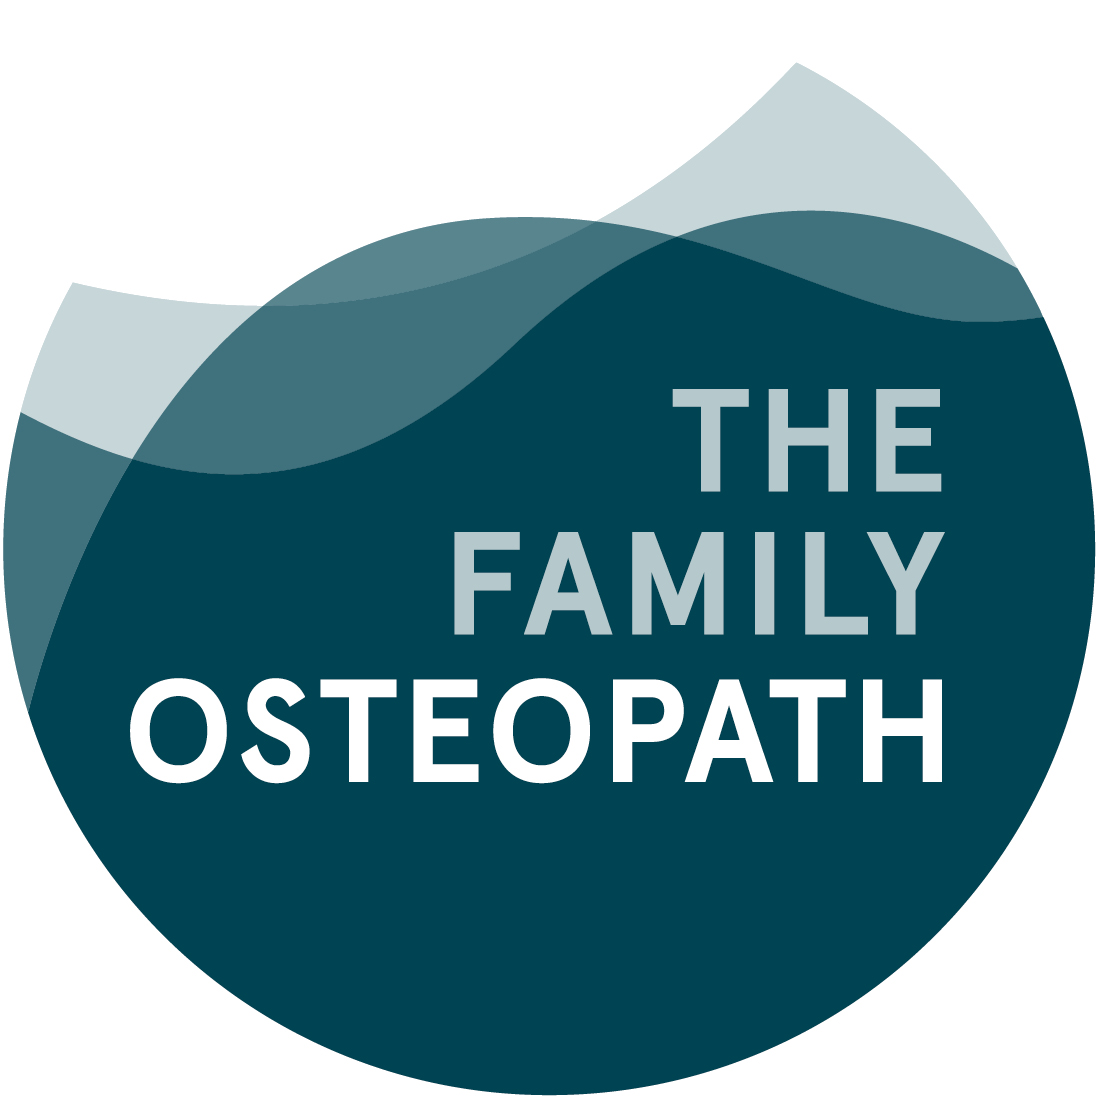 The Family Osteopath in Berlin Mitte